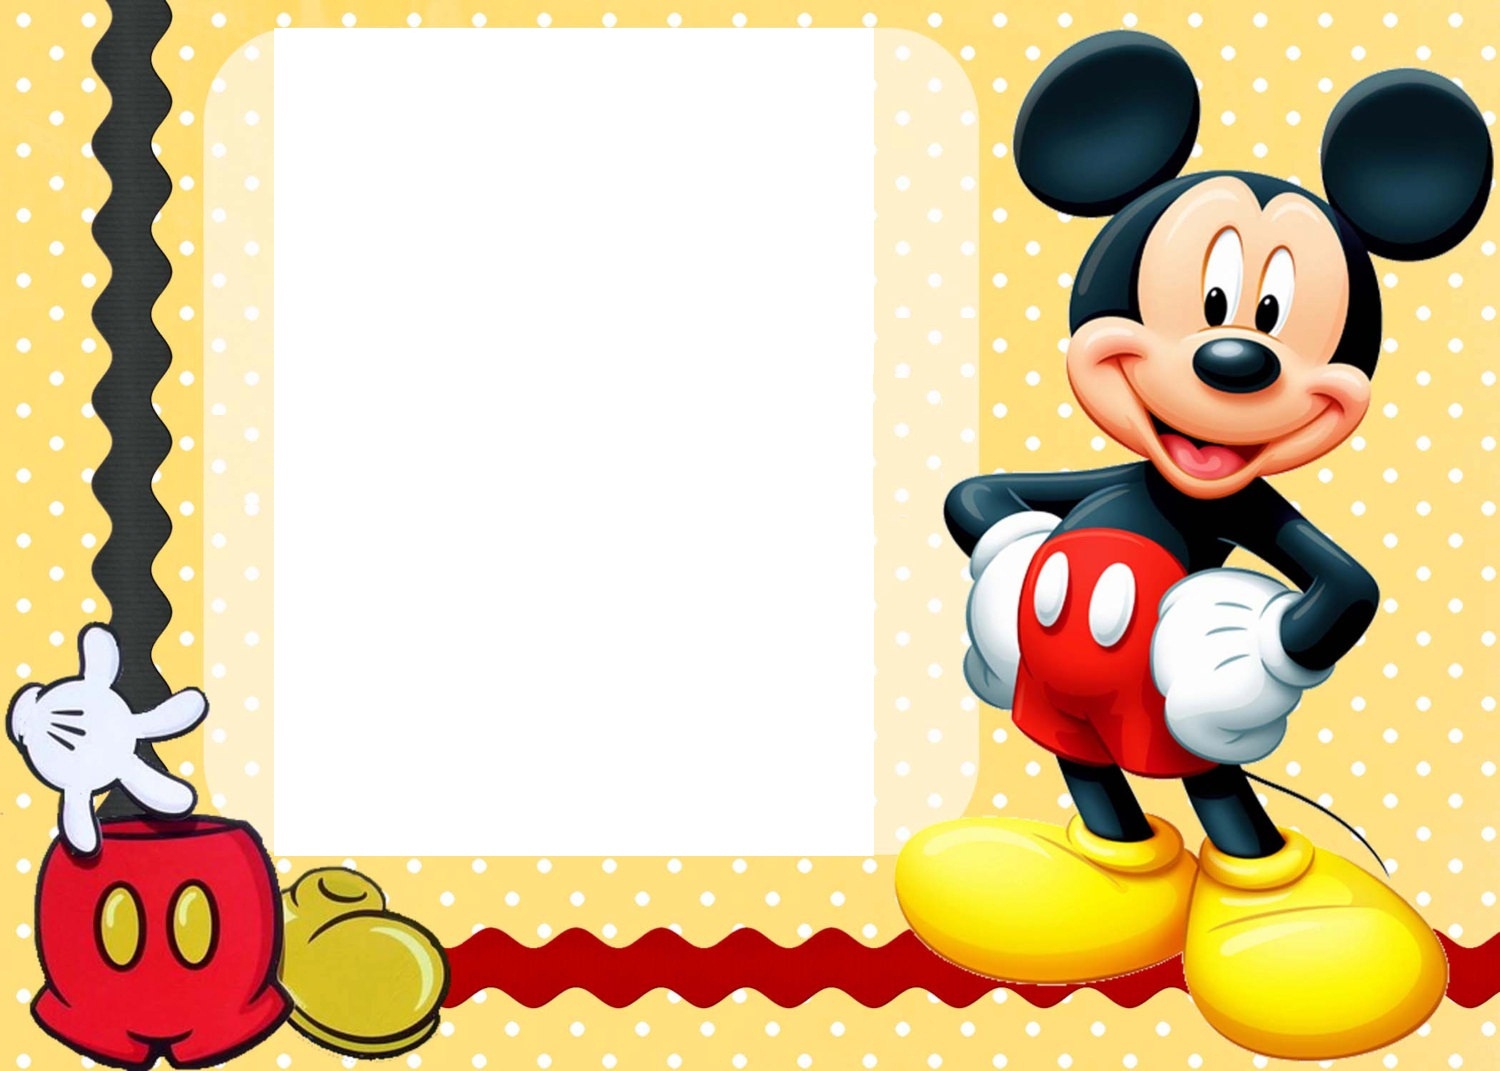 Free Mickey Mouse Template, Download Free Clip Art, Free Clip Art On - Free Printable Mickey Mouse Birthday Invitations